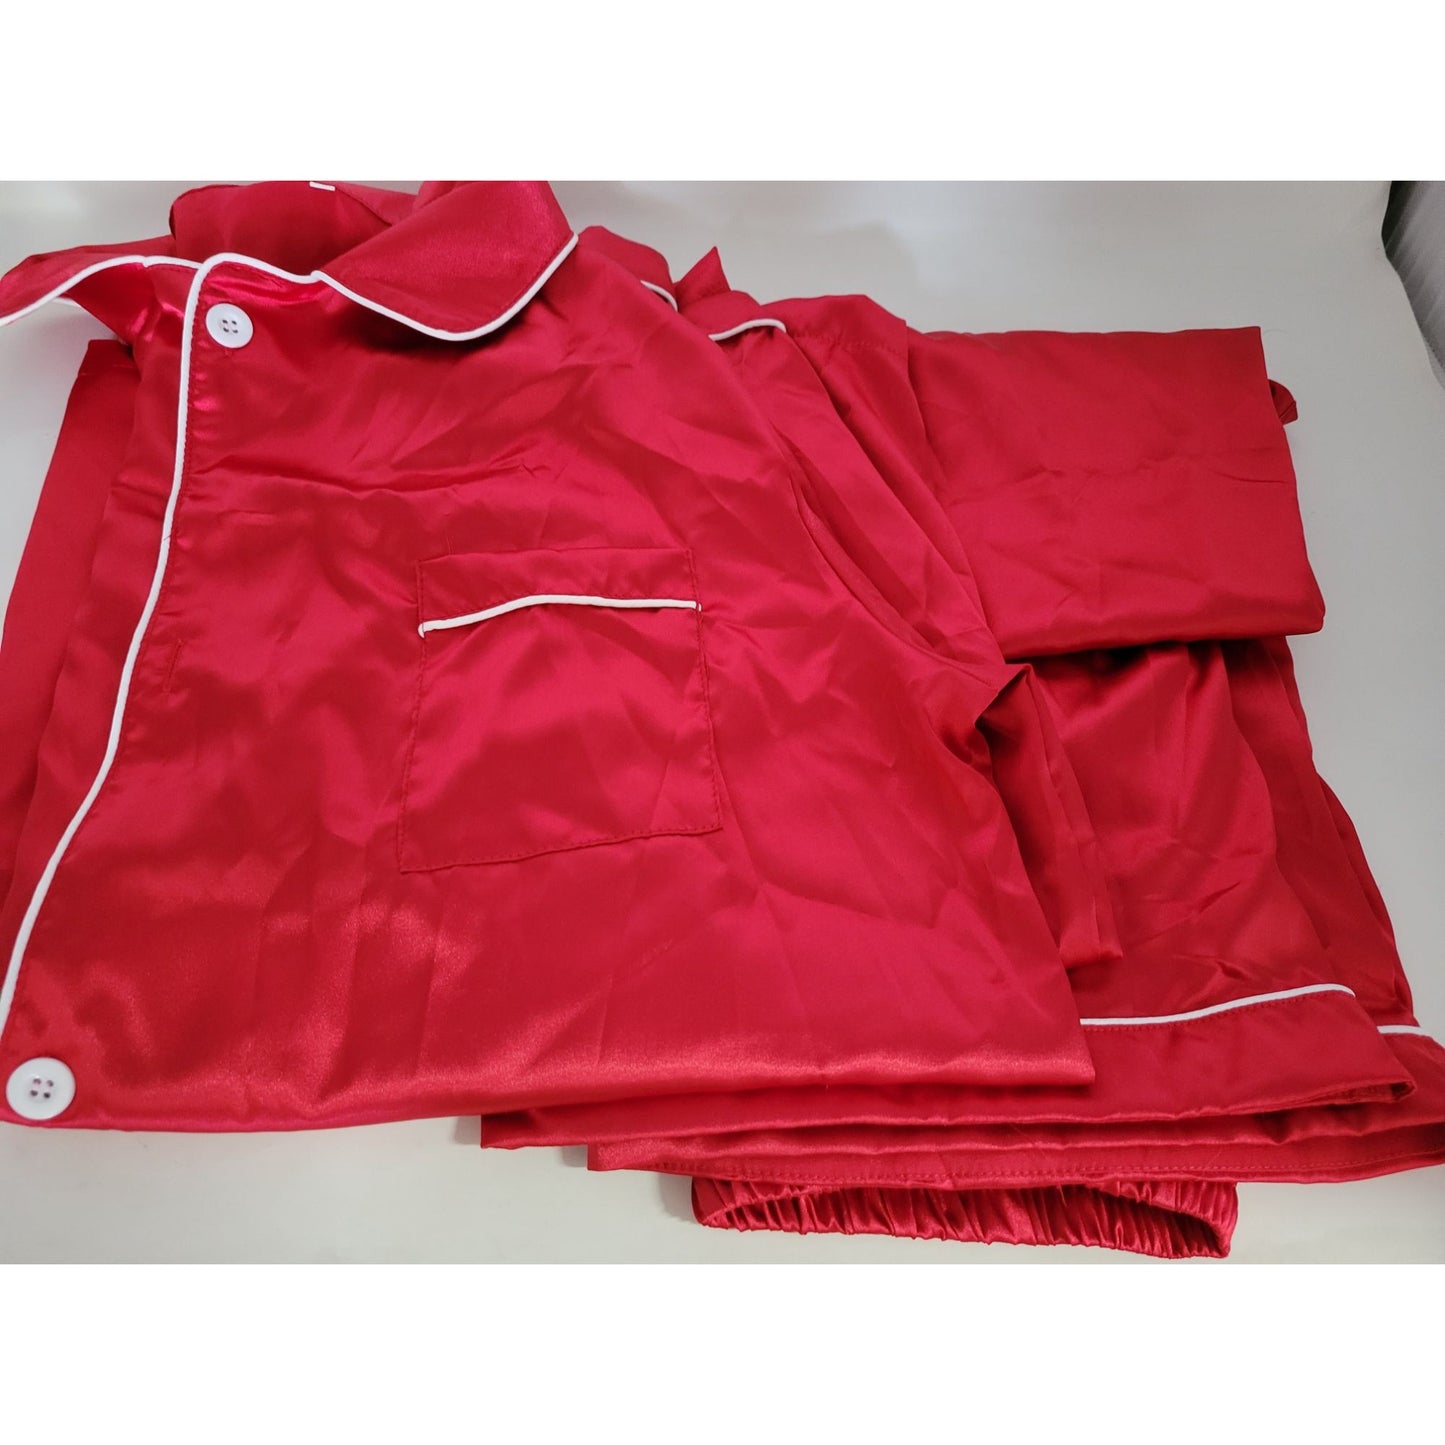 Red Satin Pajamas with White Piping and Buttons - Size2XL